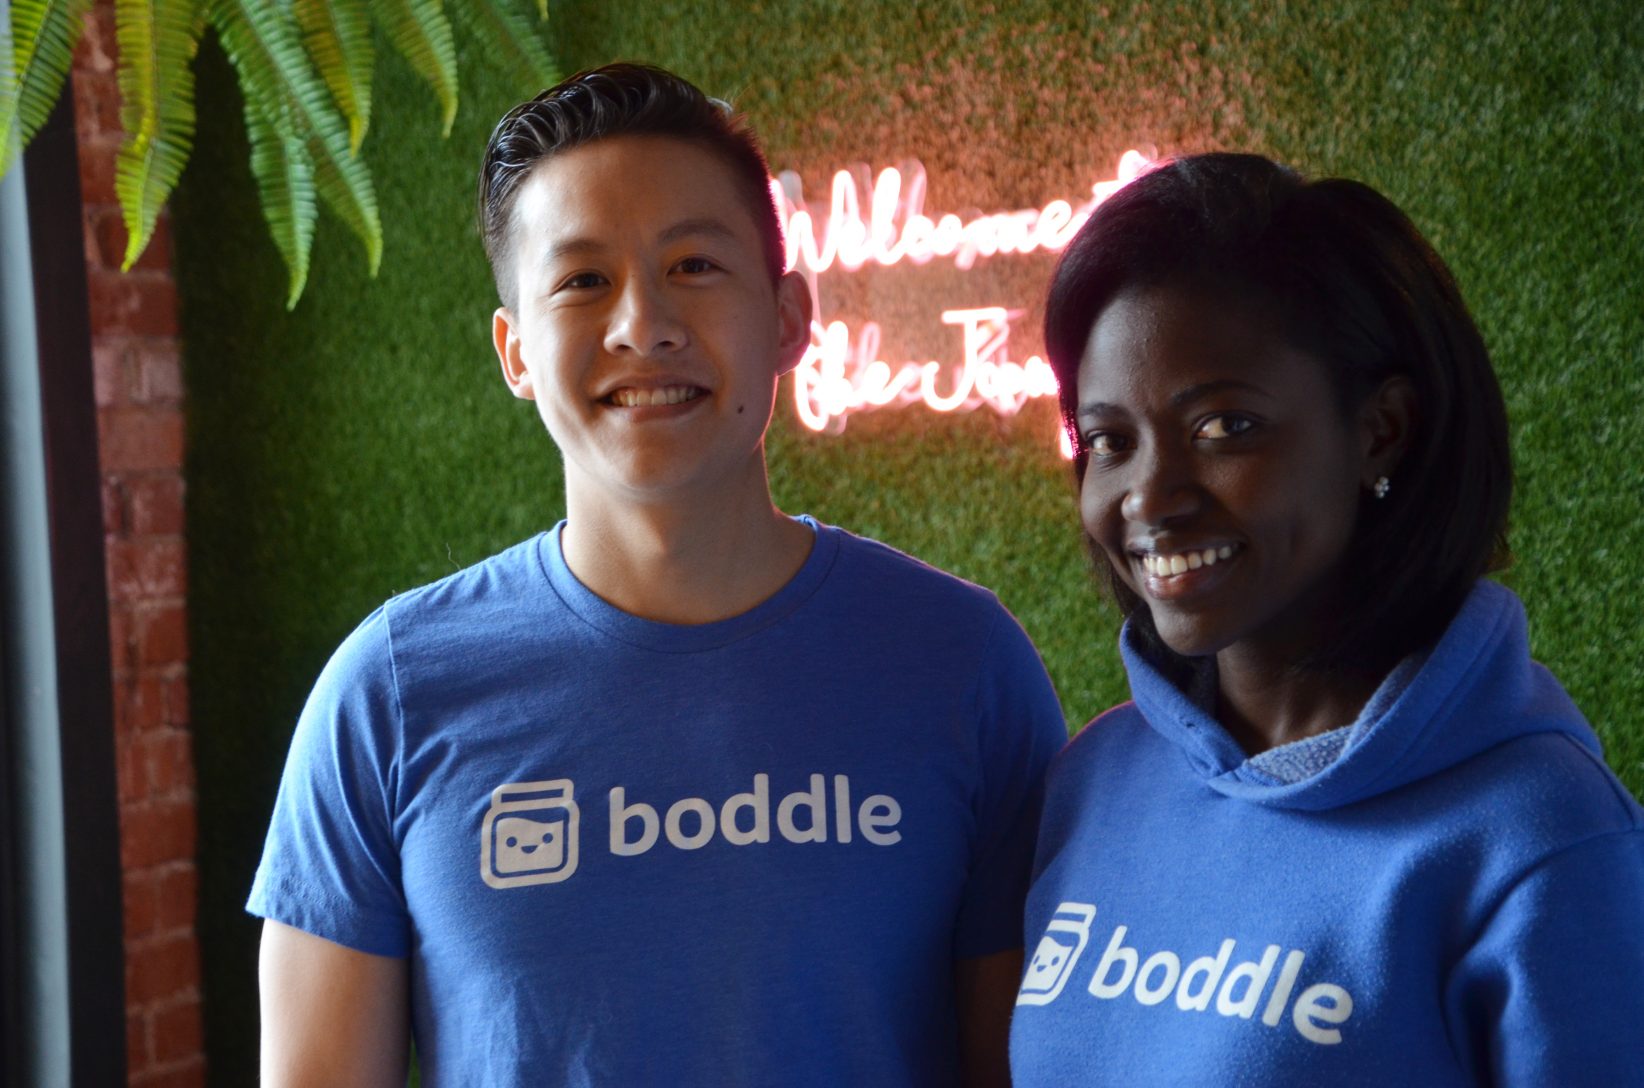 Boddle dials into another $100K from AT&T to boost gamified learning at home